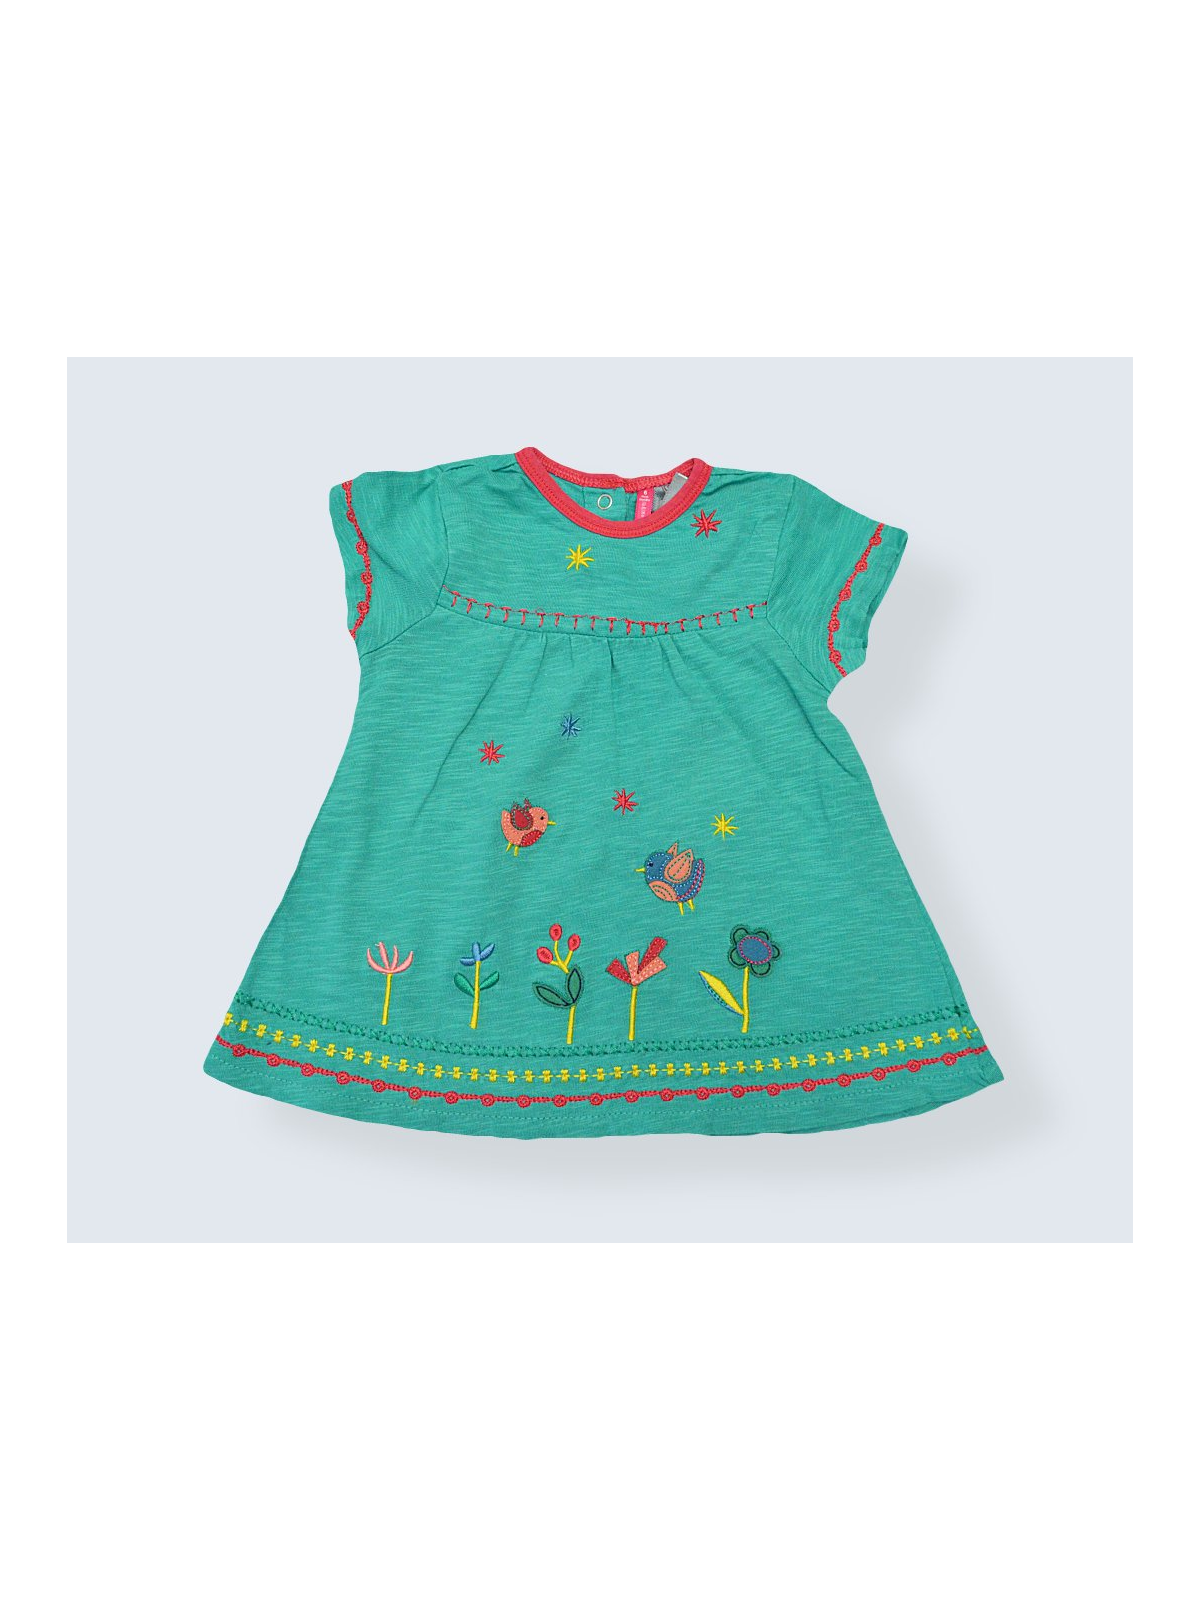 Robe d'occasion Orchestra 6 Mois pour fille.